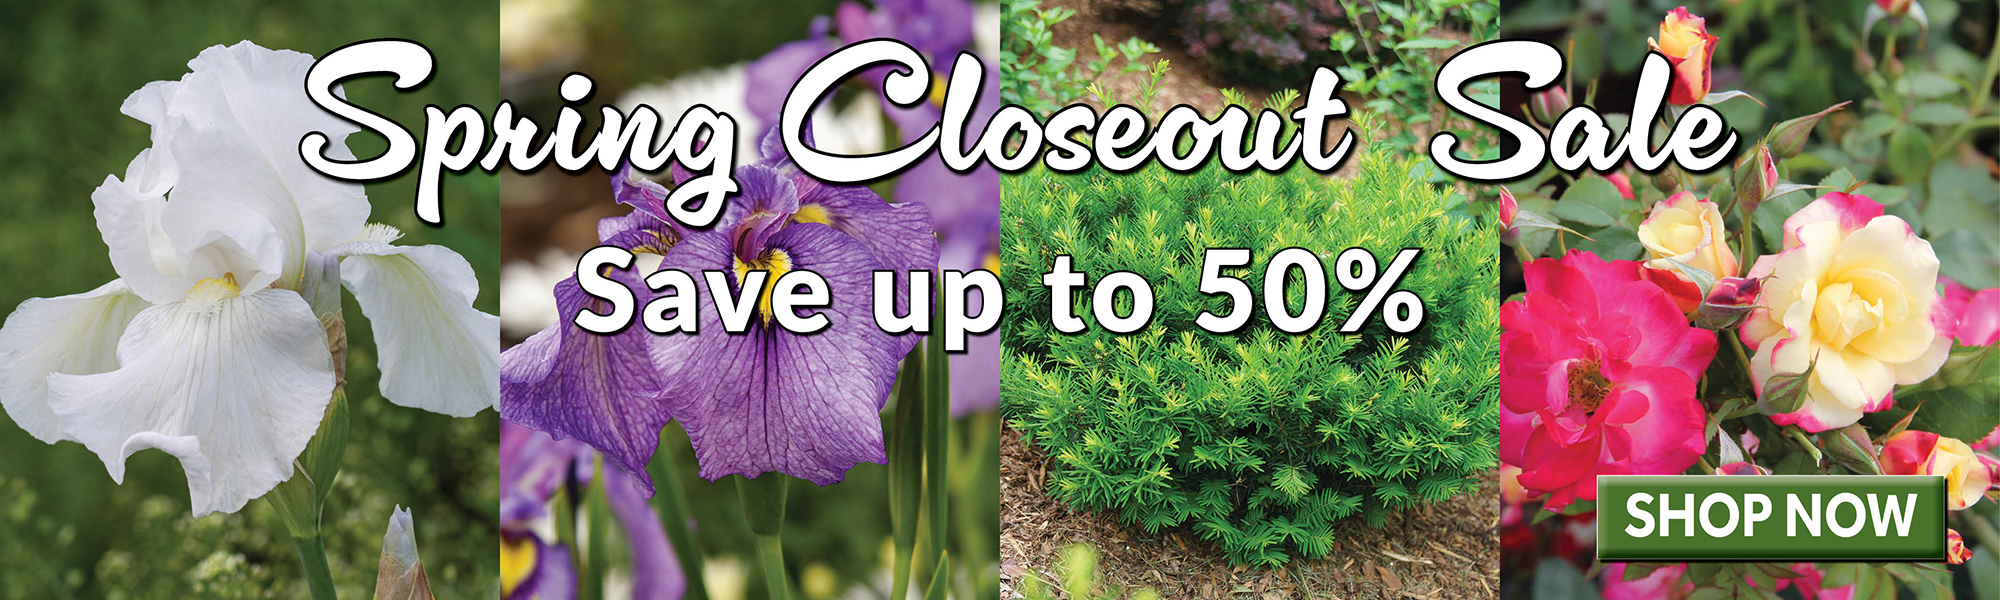 Spring Closeout Sale